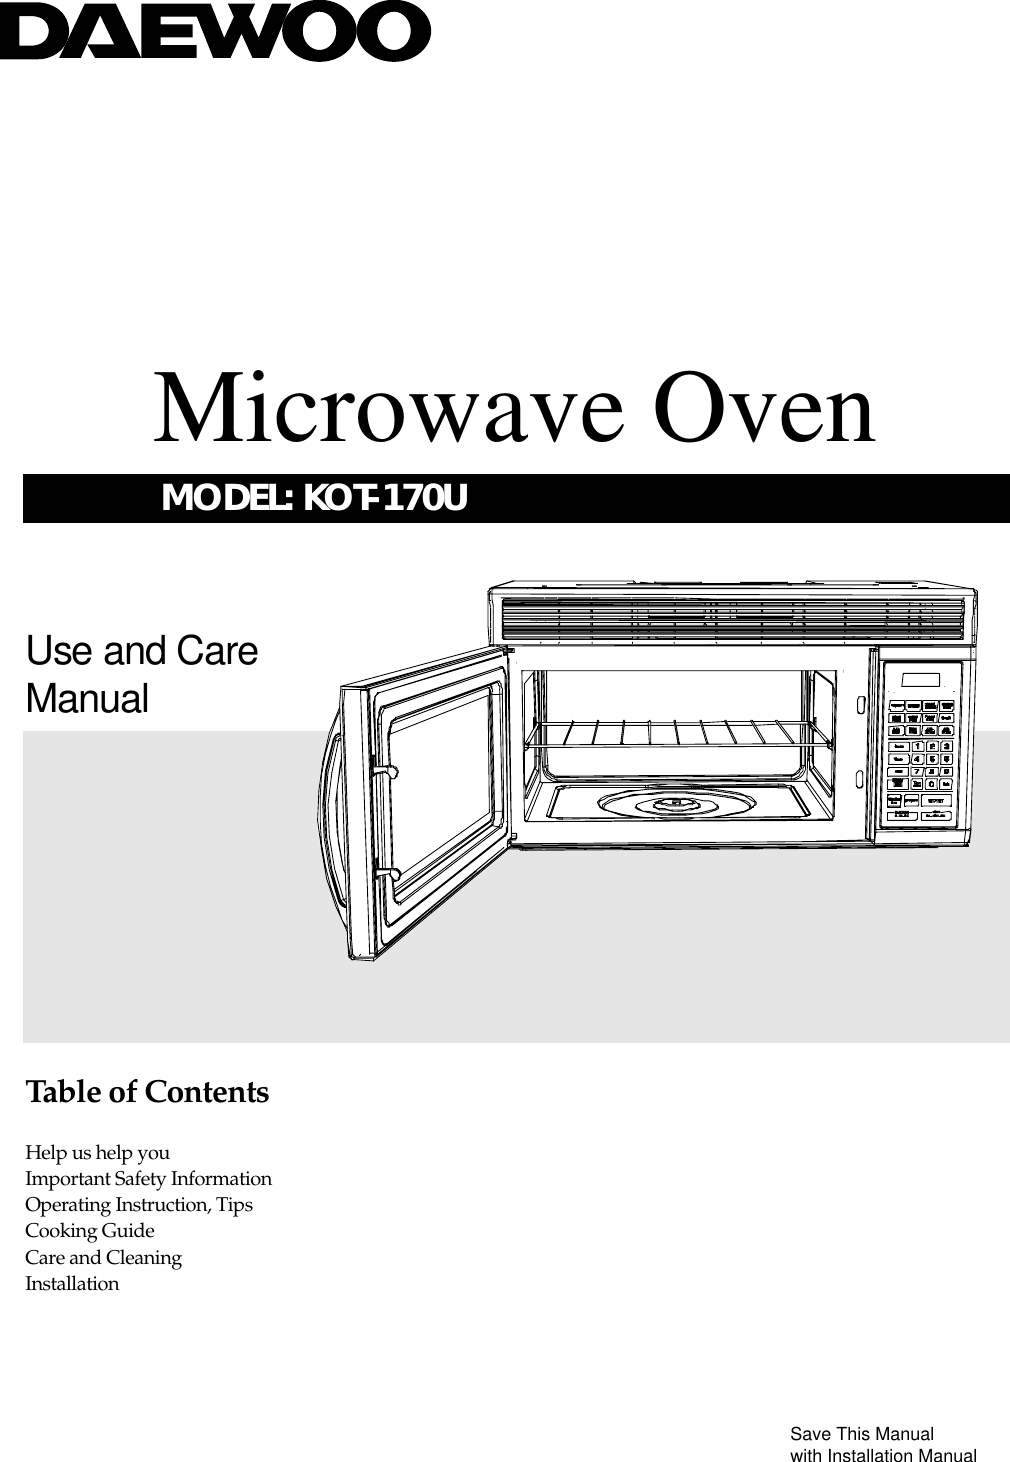 Use and CareManualTable of ContentsHelp us help youImportant Safety InformationOperating Instruction, TipsCooking GuideCare and CleaningInstallationSave This Manualwith Installation ManualMicrowave Oven    MODEL: KOT-170U